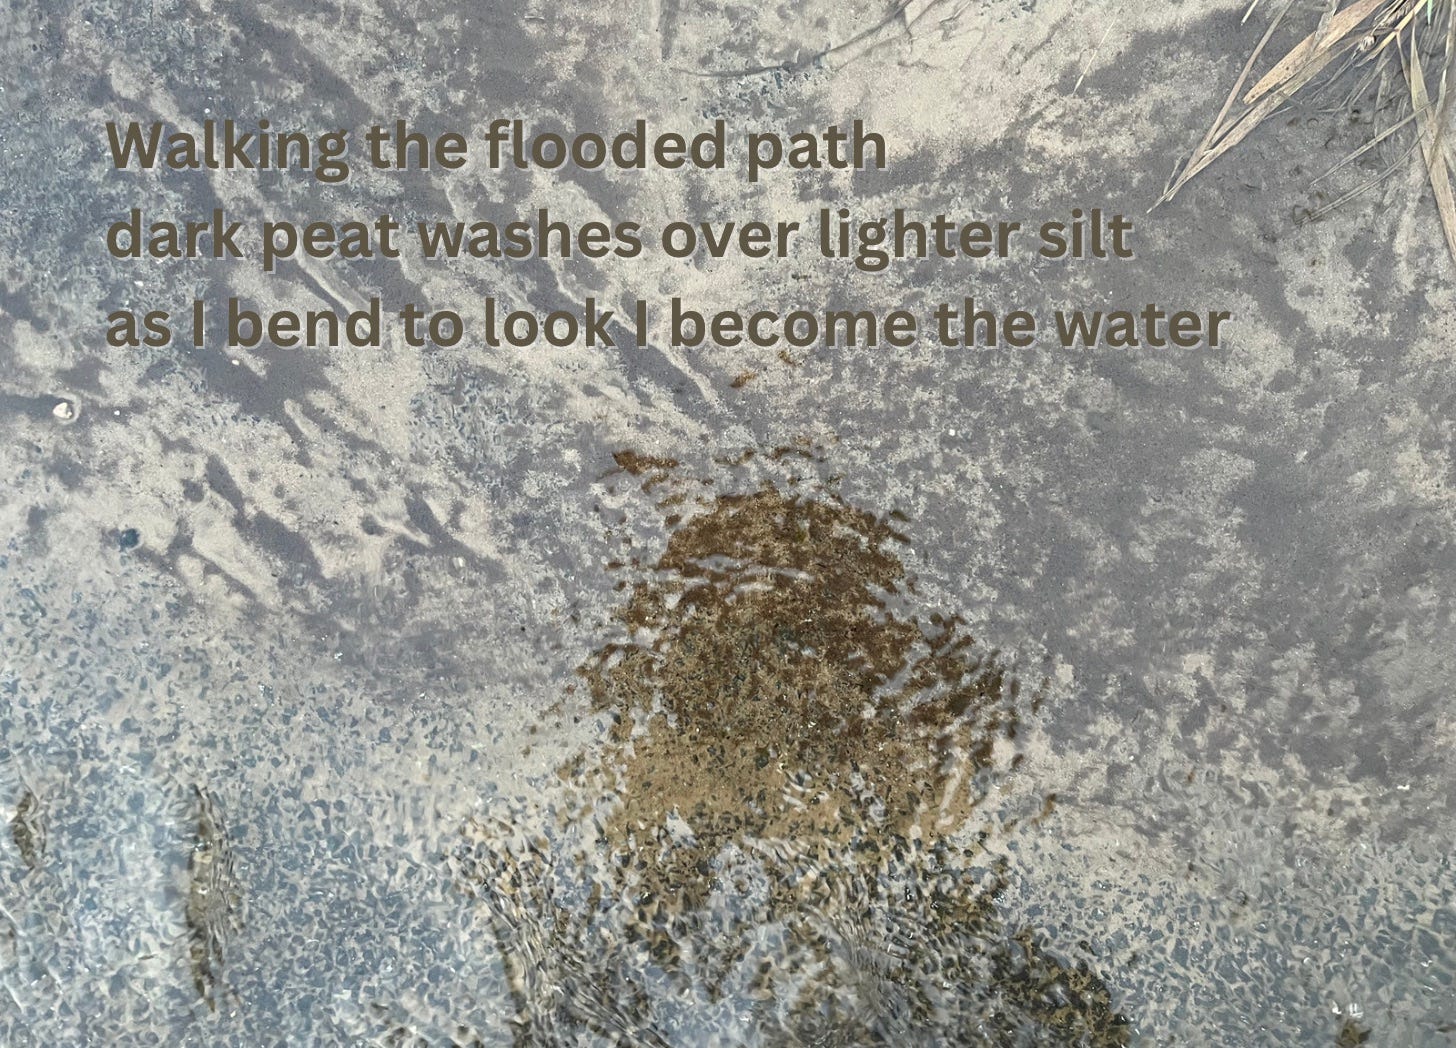 Prose by Michela Griffith overlaid onto an image of soil washed onto flooded path